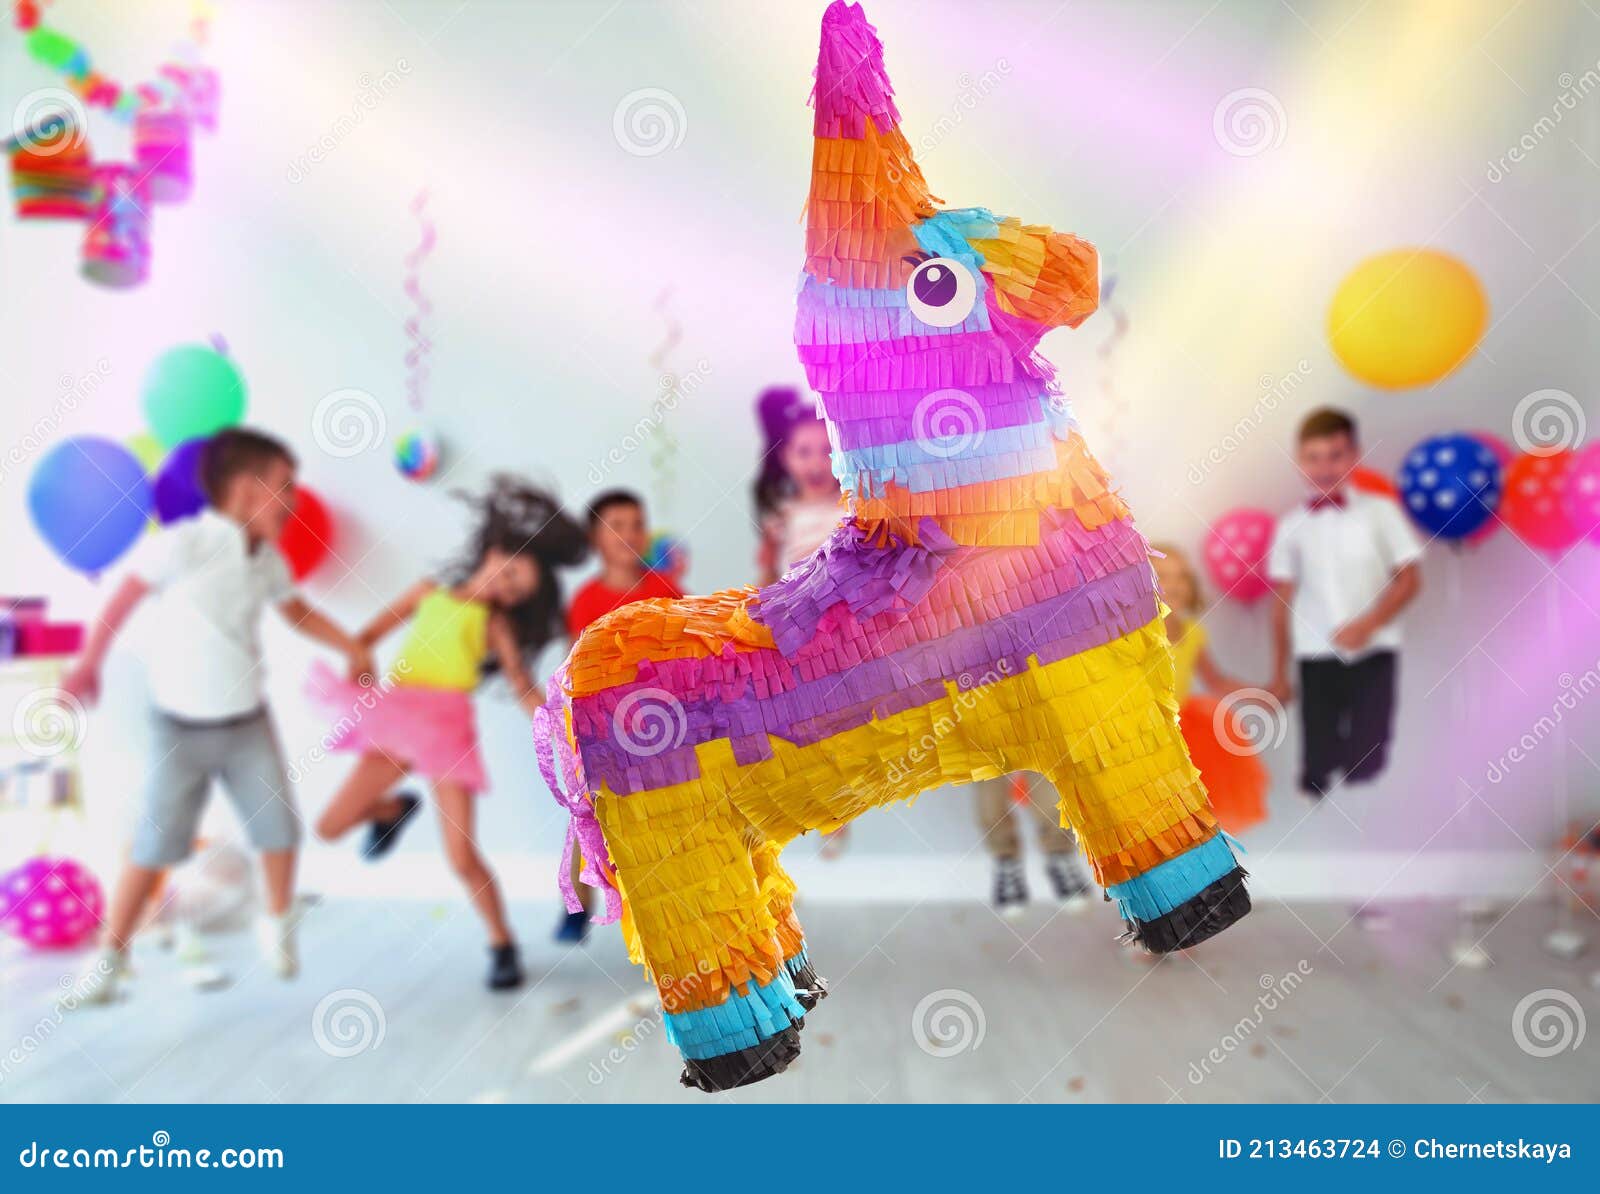 Bright Festive Pinata Hanging Indoors at Birthday Party Stock Photo - Image  of candy, festive: 213463724